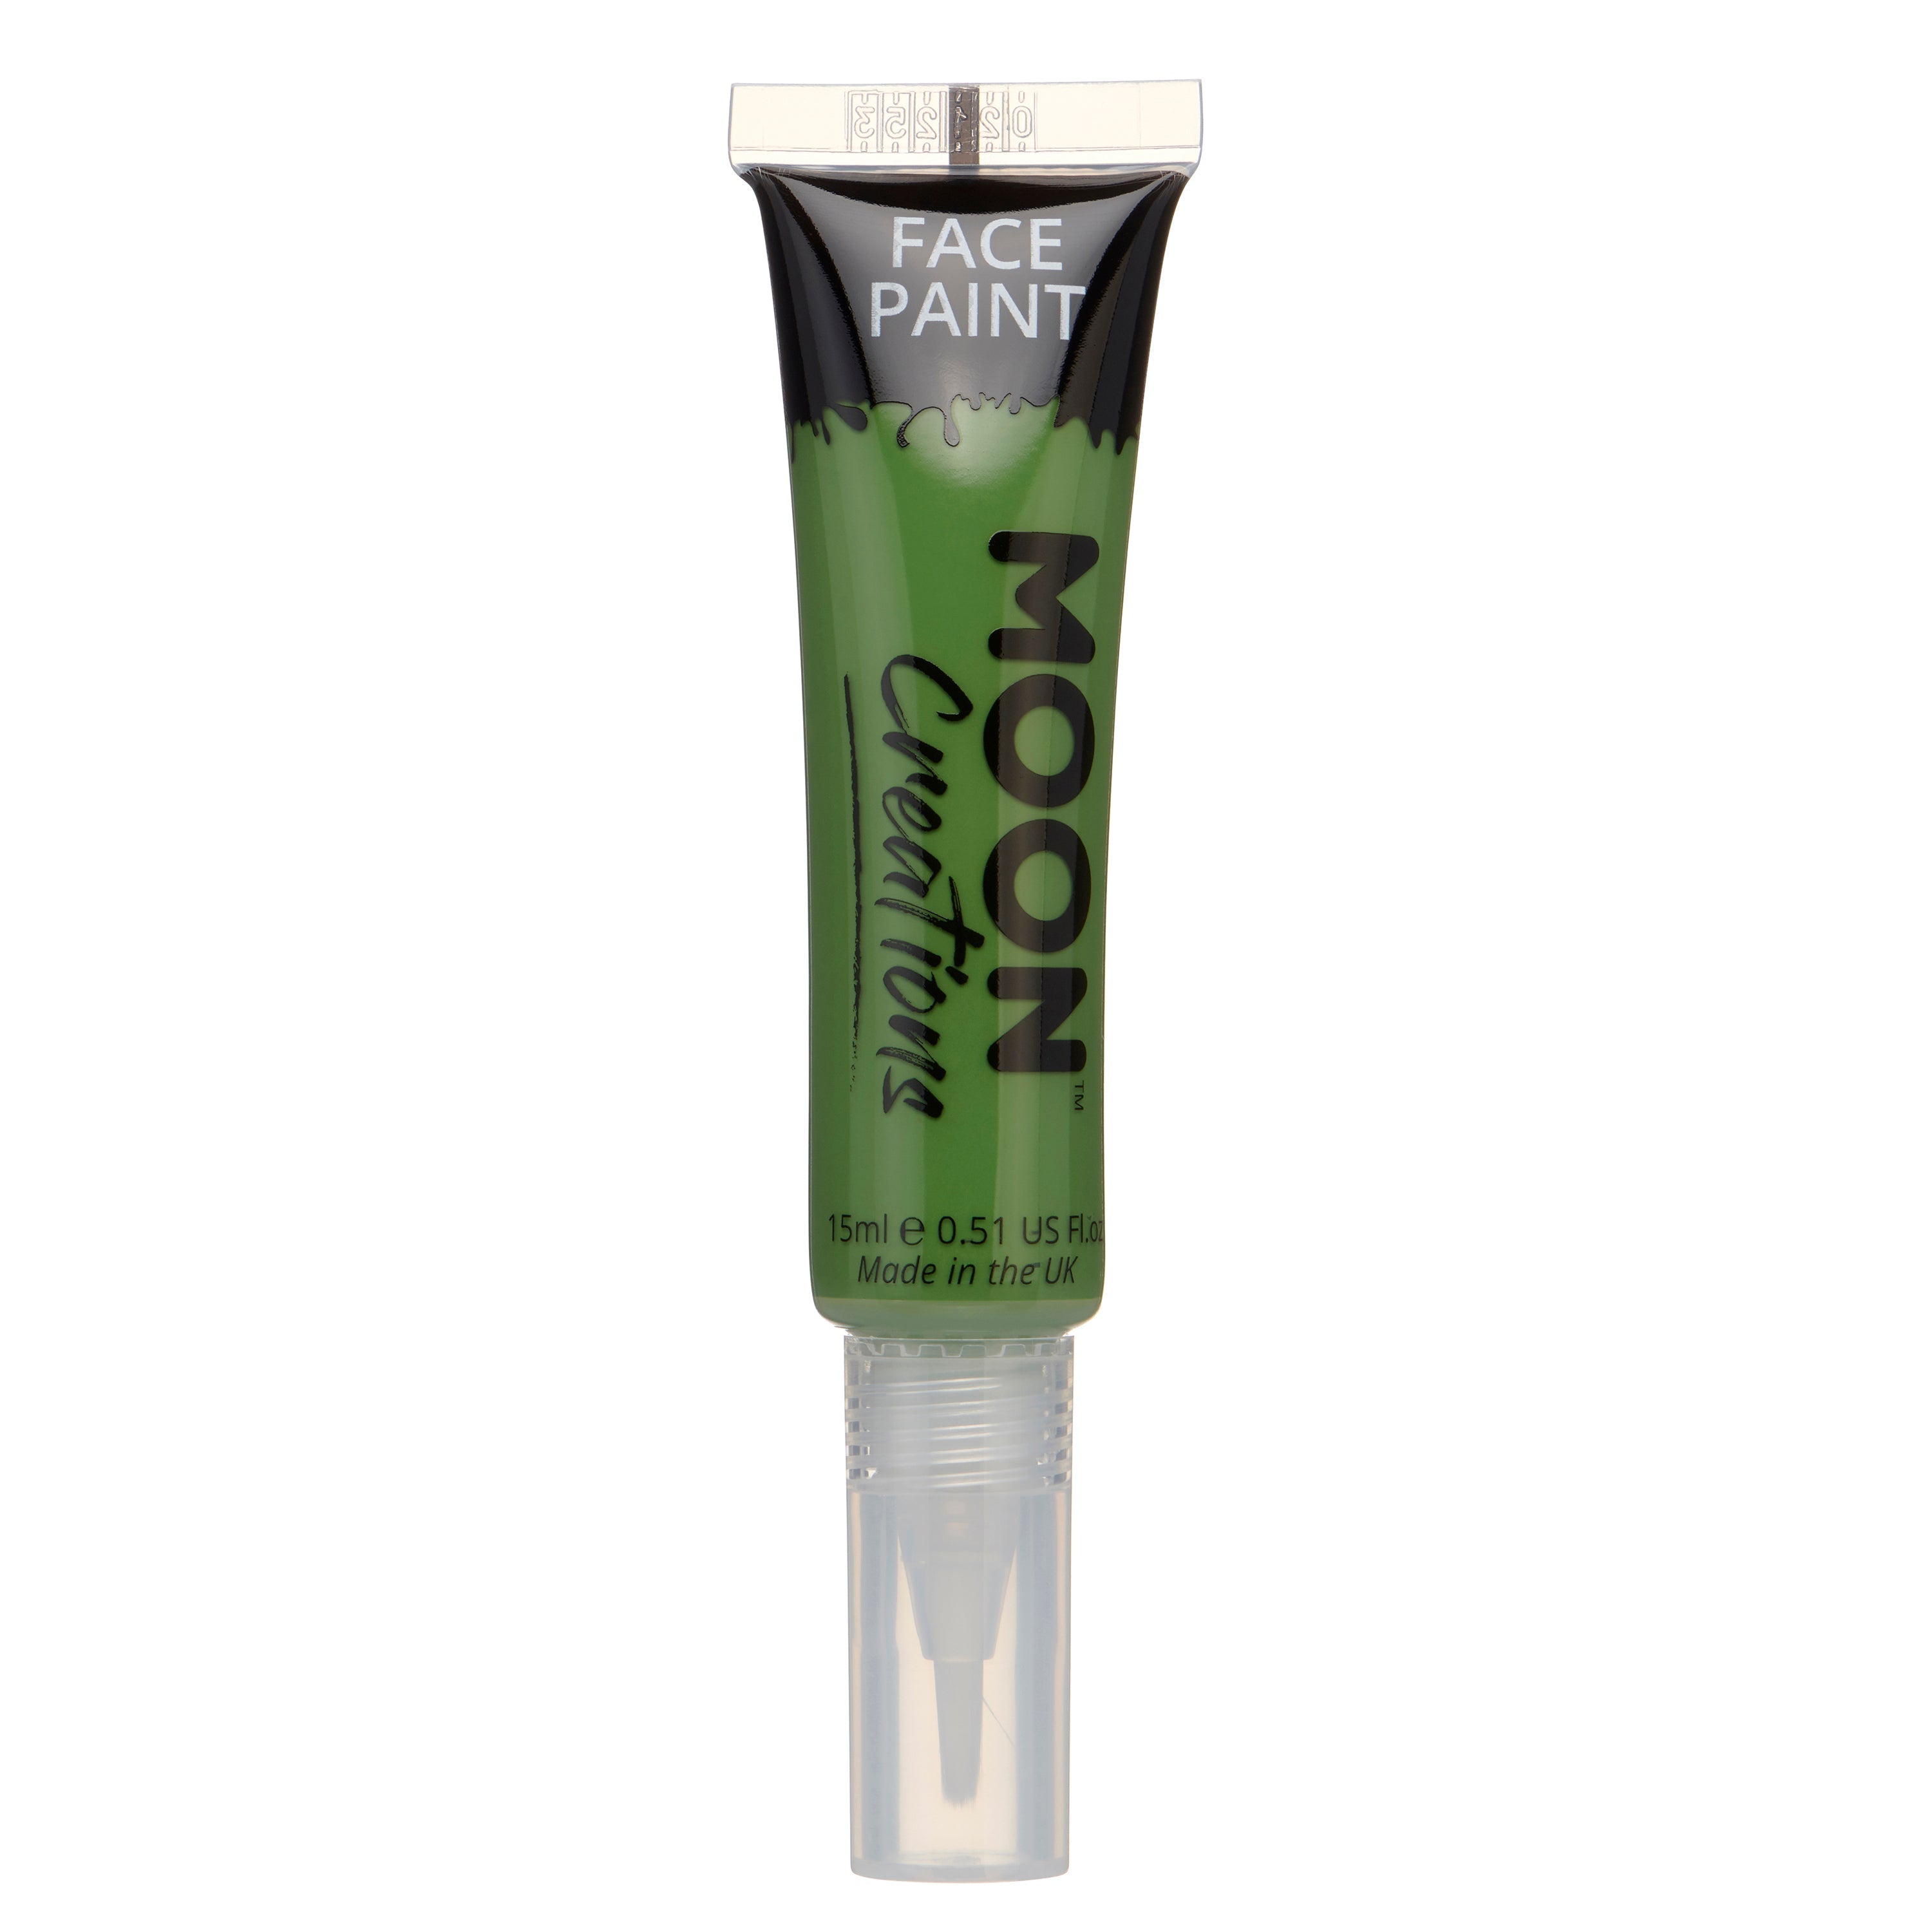 Green - Face & Body Paint Makeup w/brush, 15mL. Cosmetically certified, FDA & Health Canada compliant, cruelty free and vegan.